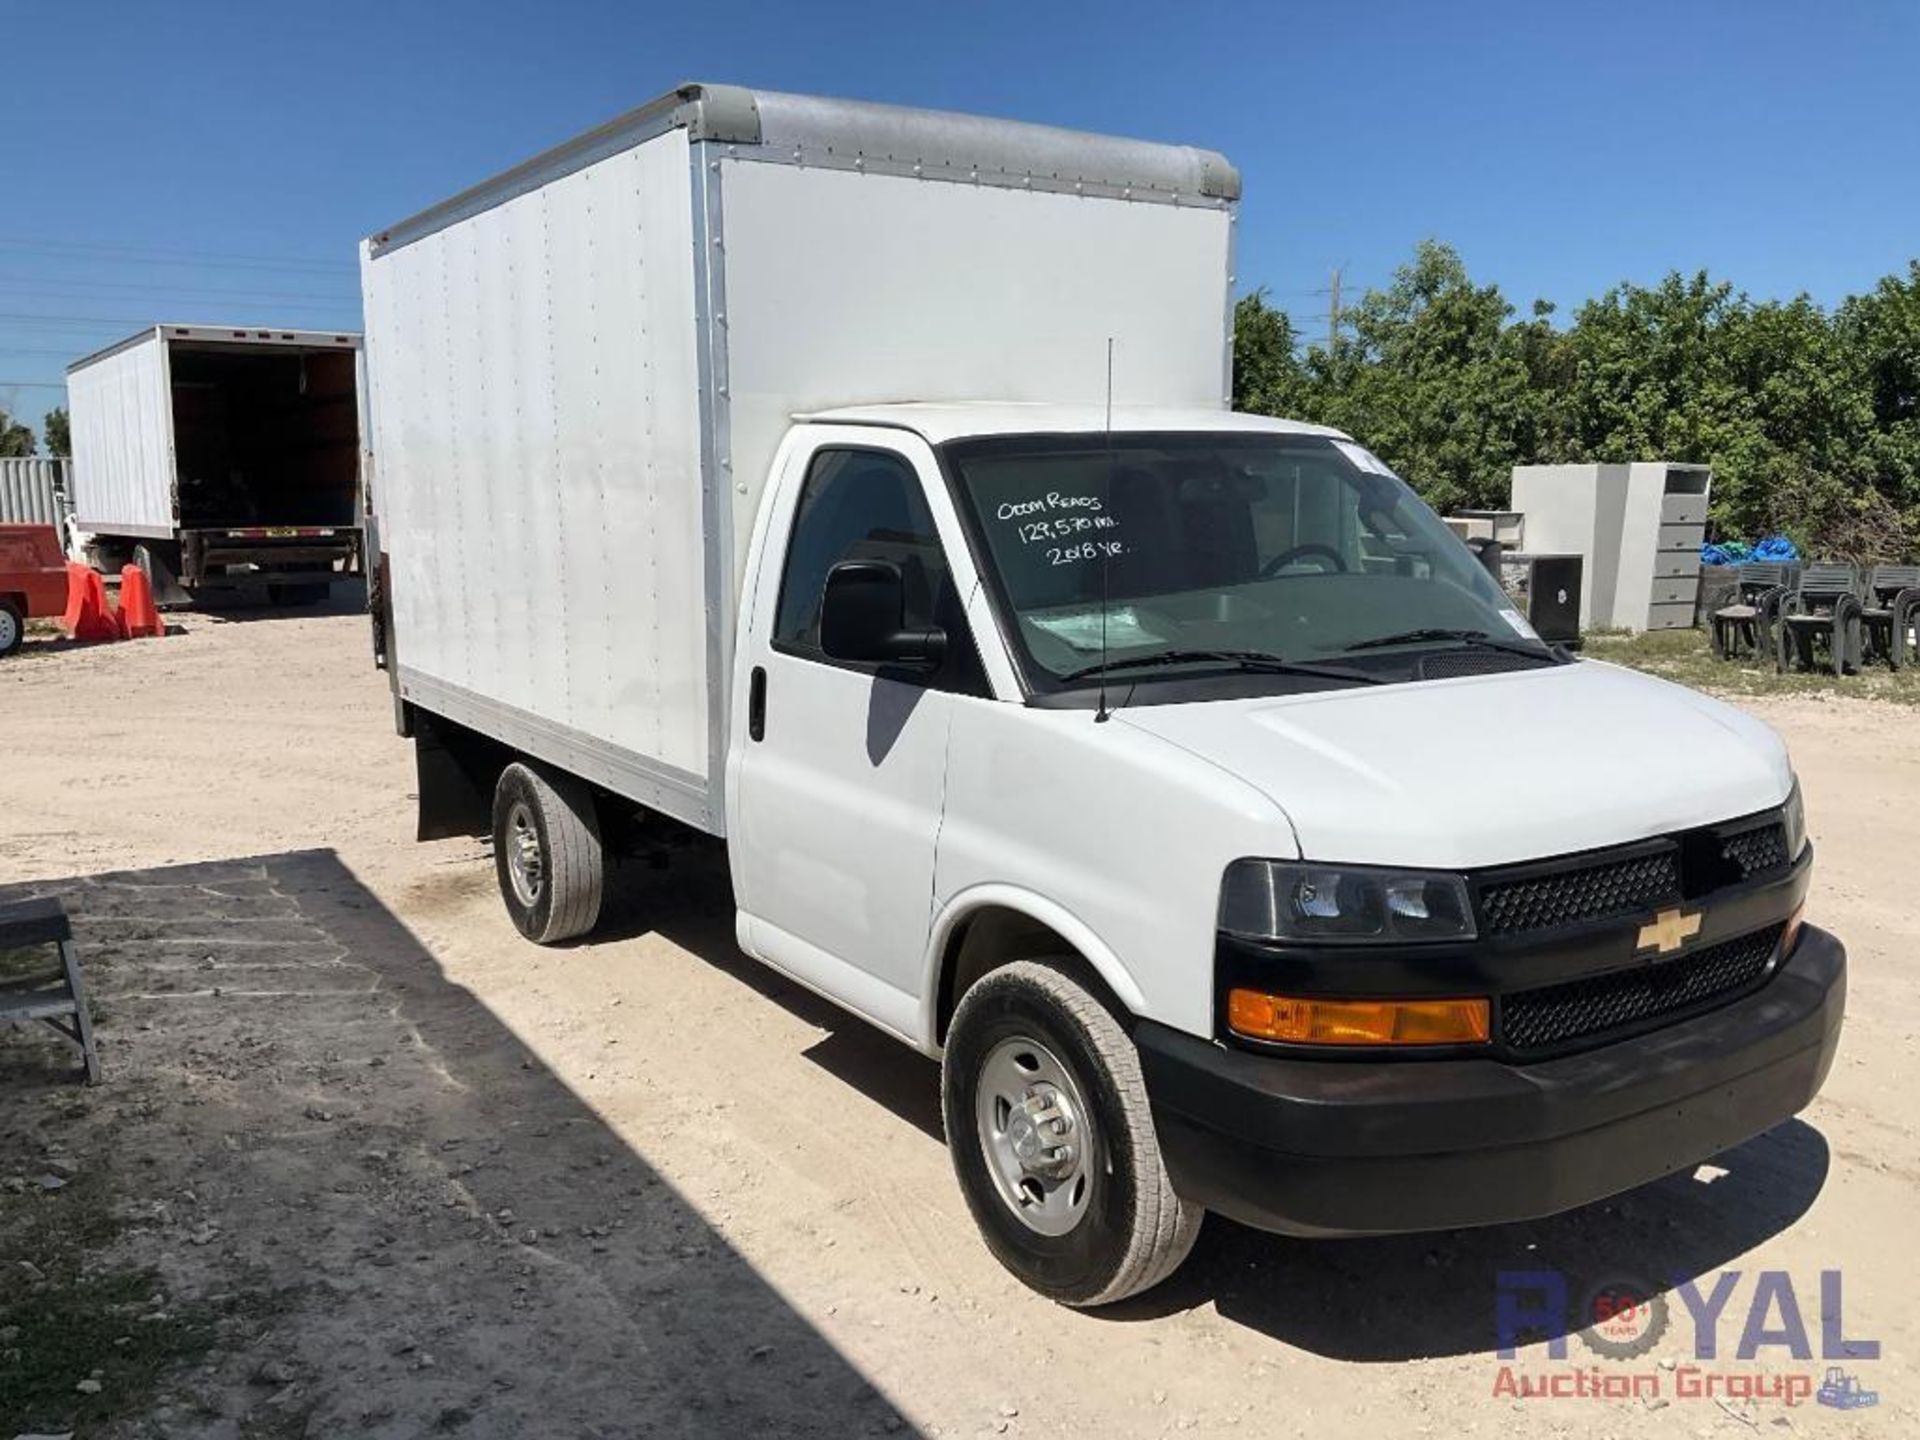 2018 Chevrolet Express 12FT Box Truck - Image 2 of 28